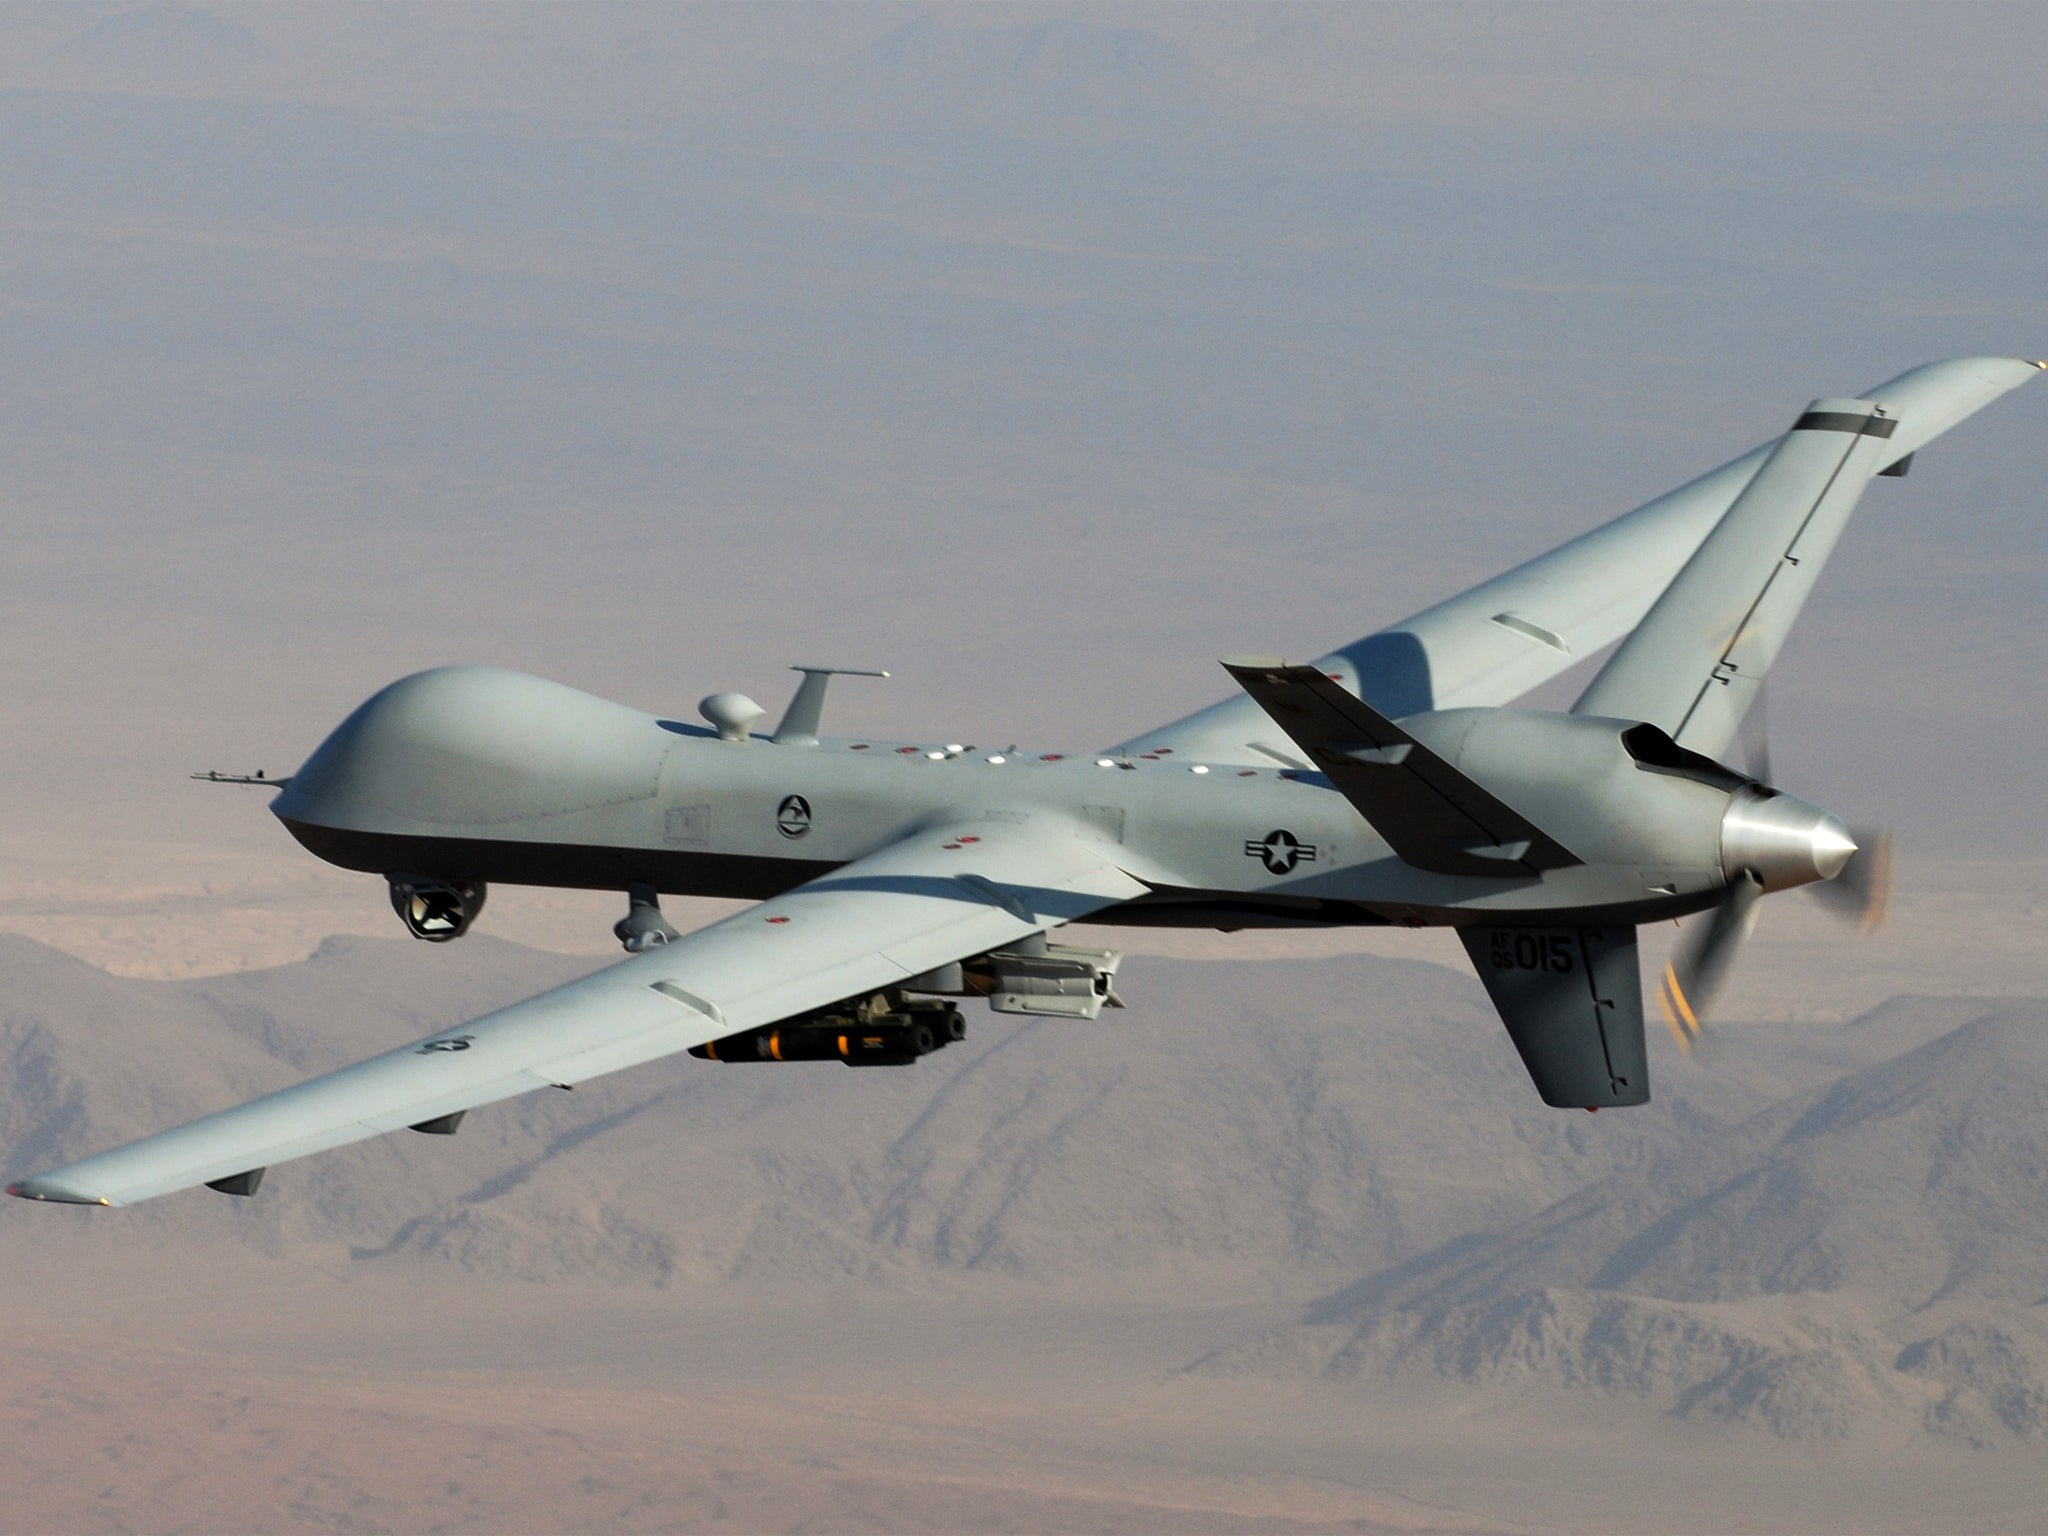 There were 255 drone strikes on Pakistan between 2004 and 2013